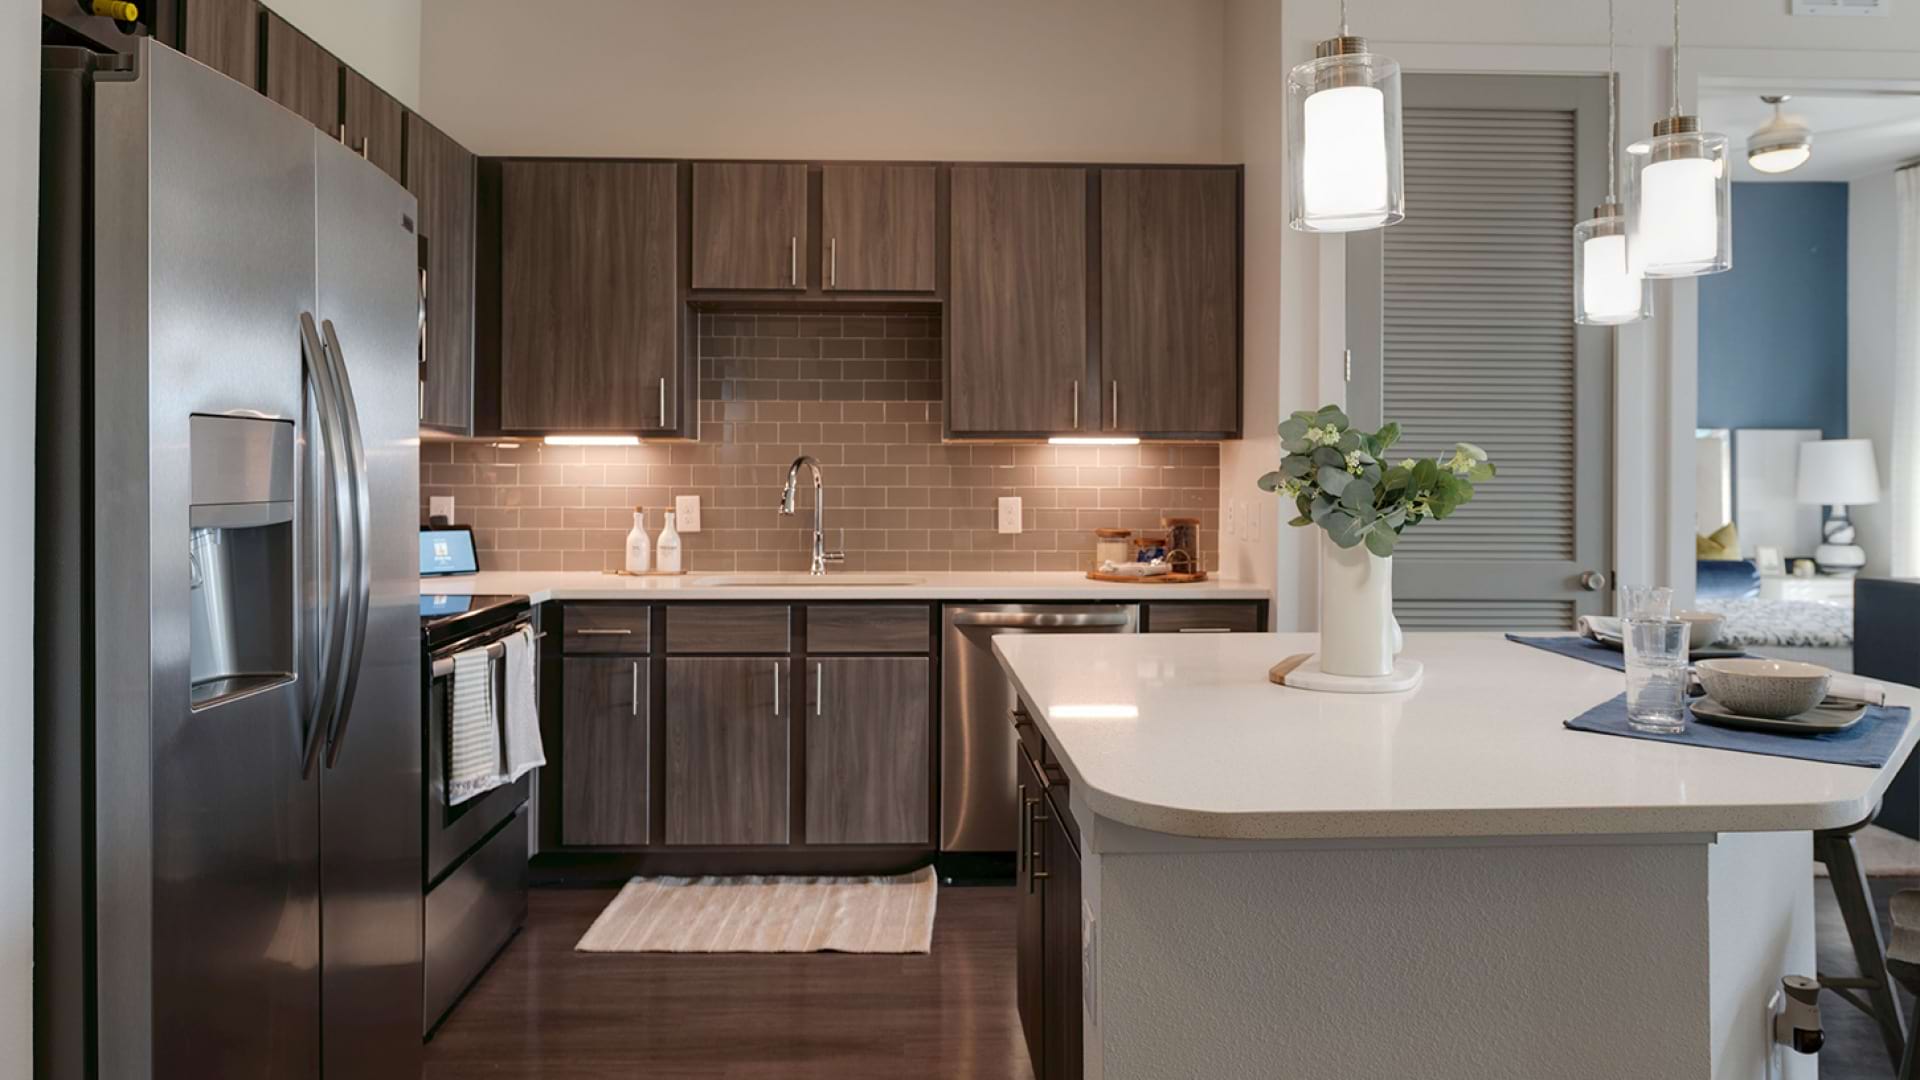 Luxury Apartment Kitchen With Stainless Steel Appliances At Our Fairview Apartments